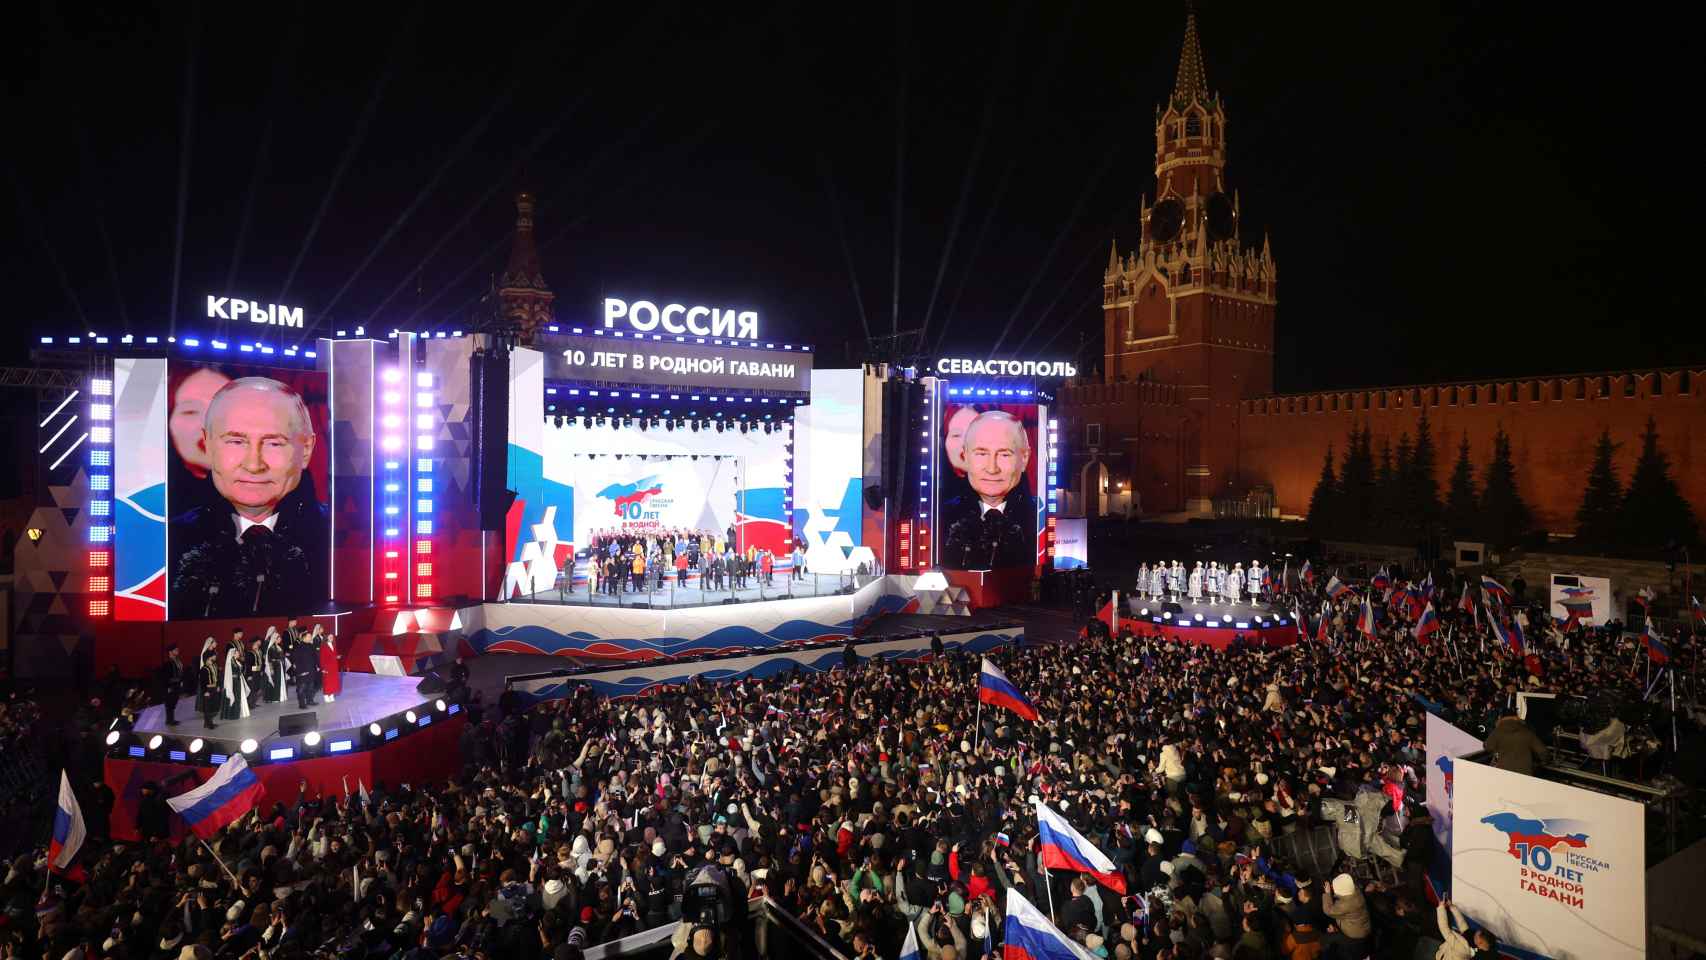 Putin and his 'opponents' go out to Red Square to celebrate the anniversary of the Russian annexation of Crimea